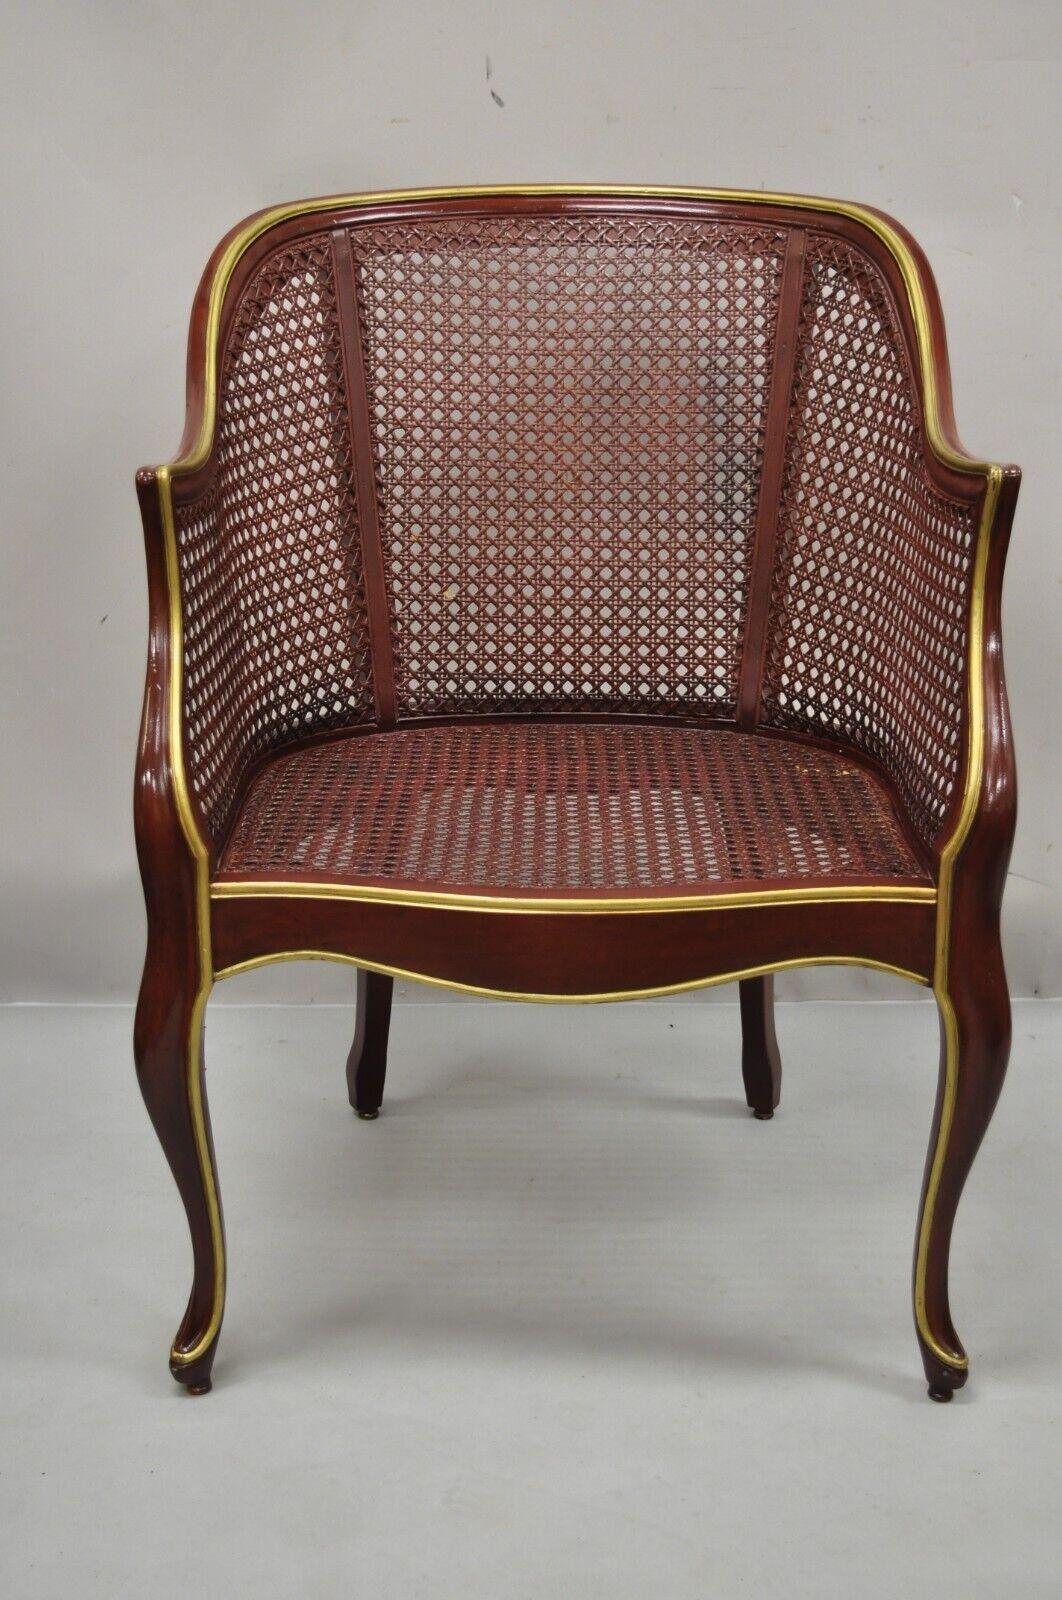 Vintage French Louis XV Style Red Lacquer Cane Bergere Lounge Chair For Sale 5